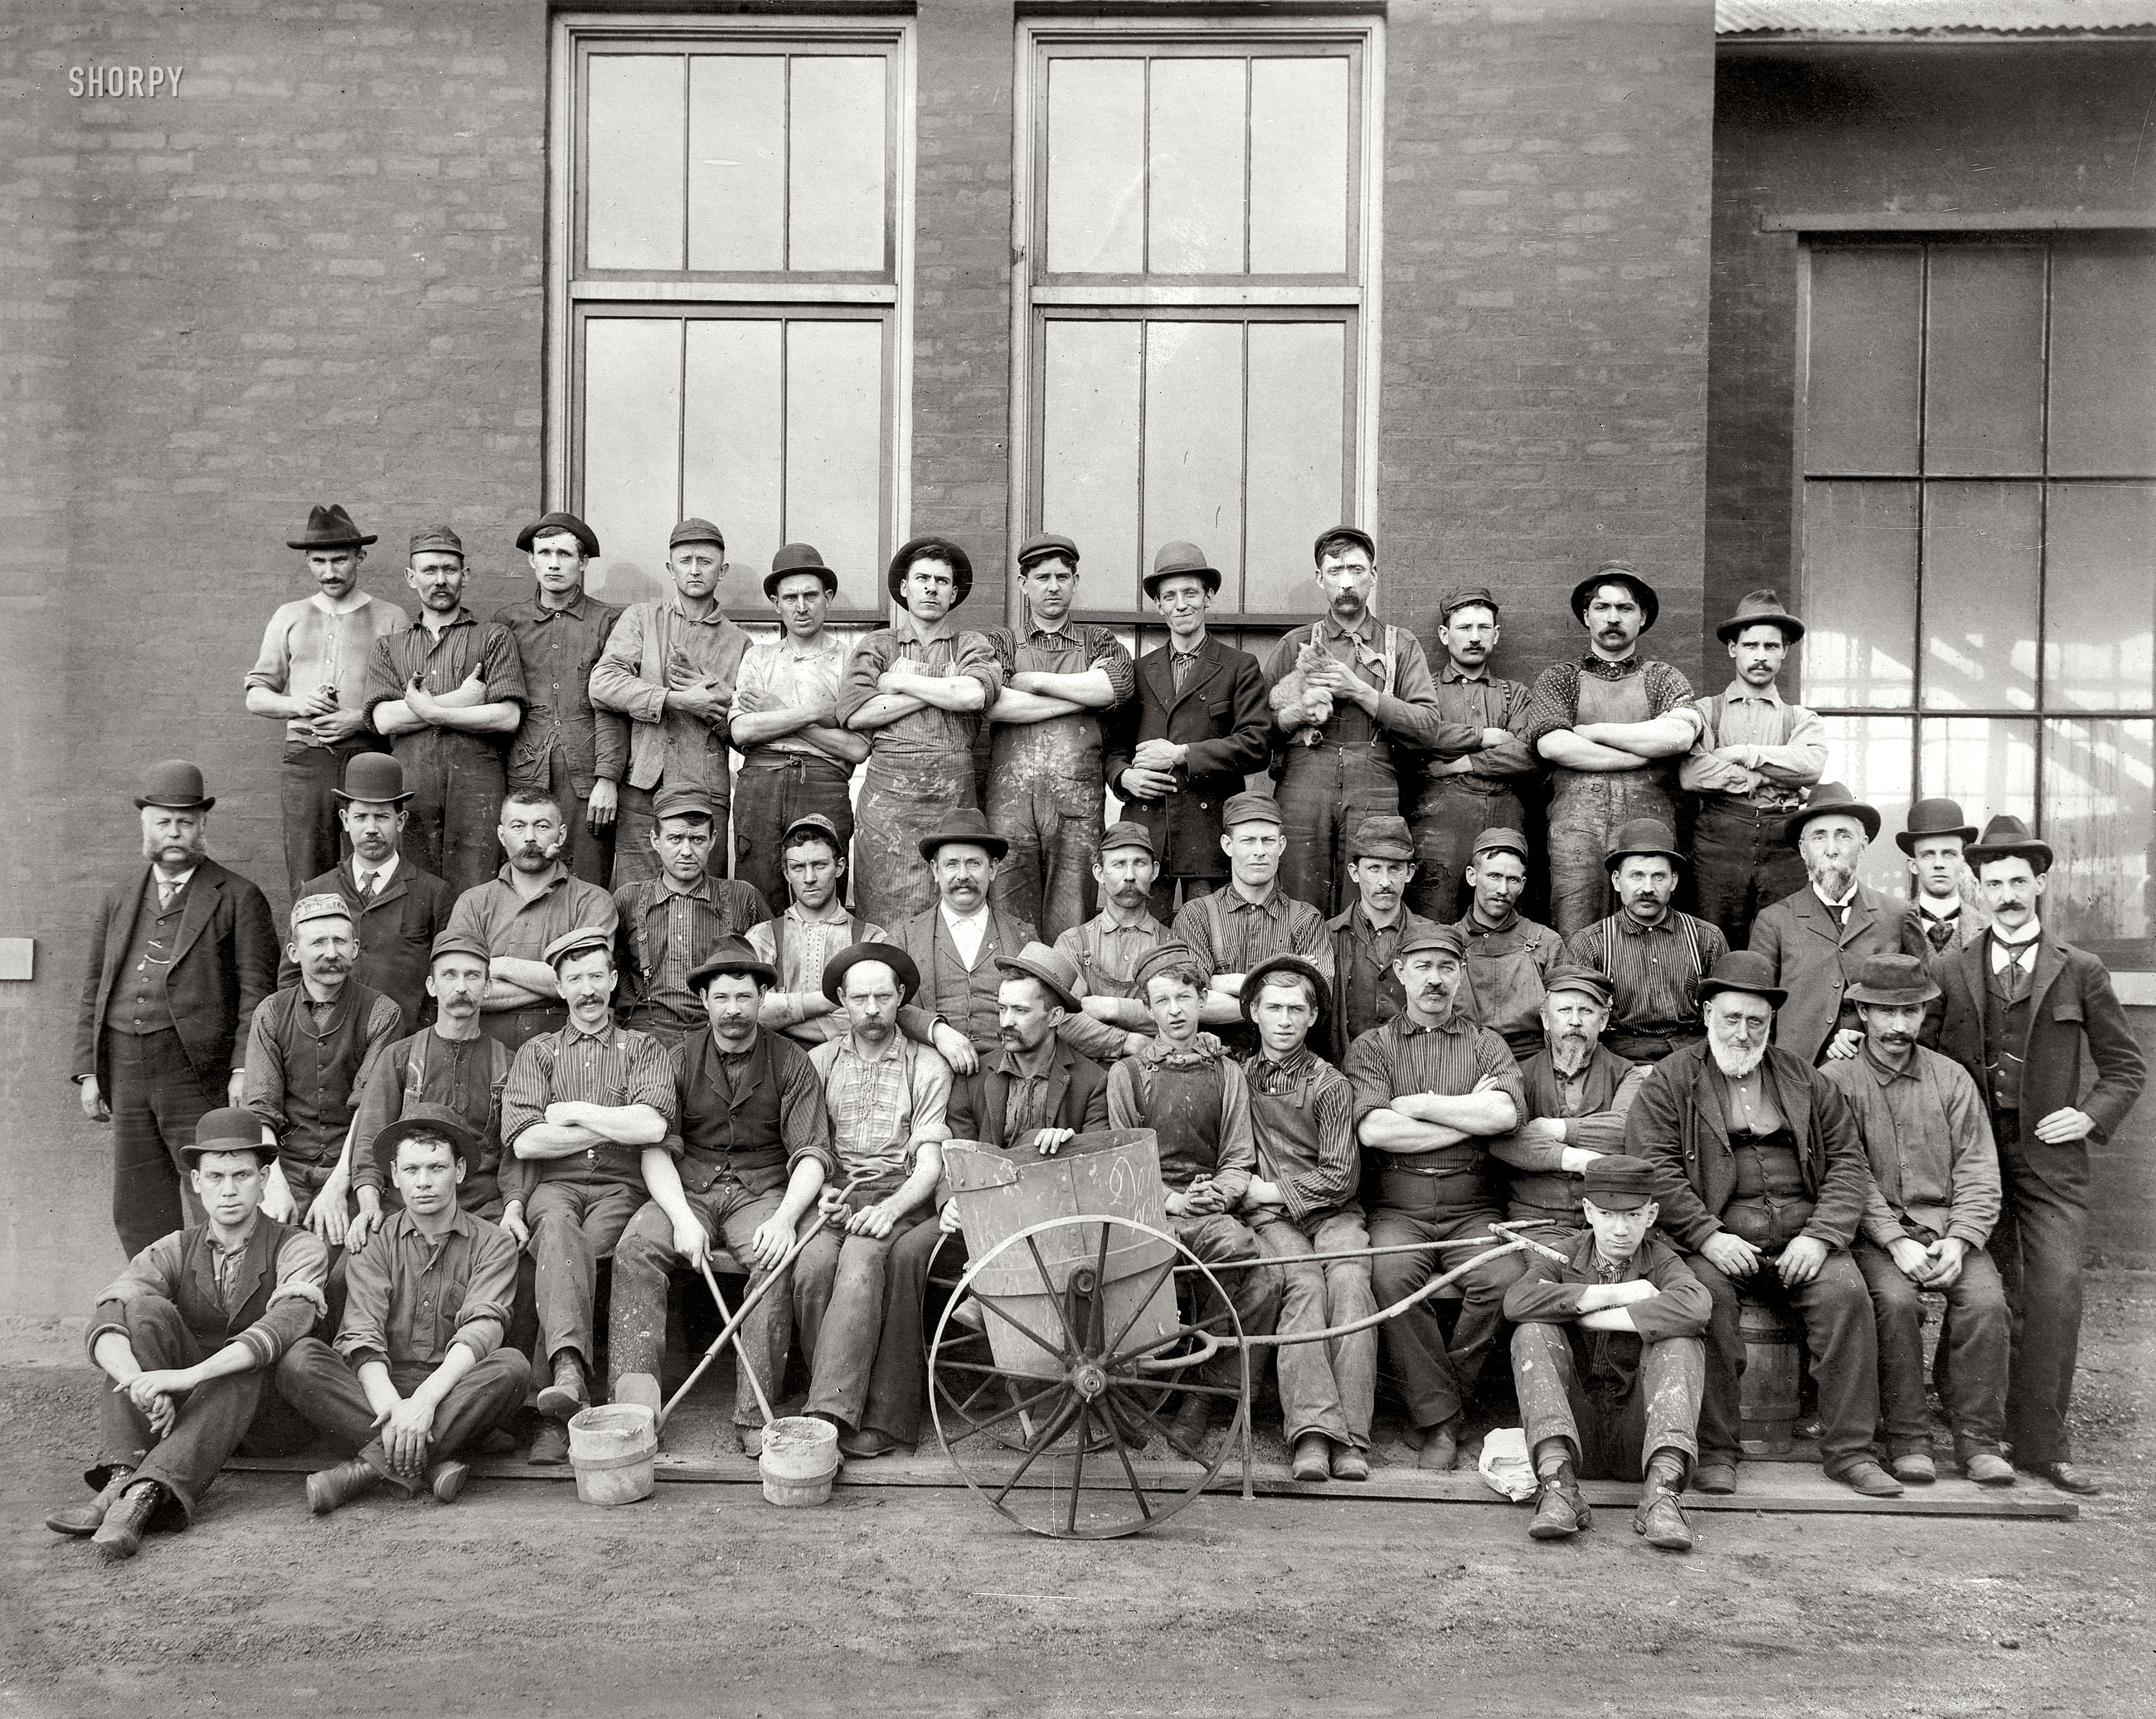 Detroit circa 1903. "Foundry and machine shop, Leland & Faulconer Mfg. Co." With bearded proprietors Robert Faulconer (left) and Henry Leland standing at either end, and two shop mascots in the top row. In 1905 the company, which made car engines, merged with Cadillac Automobile Co. Some years after selling Cadillac to General Motors, Leland started the Lincoln Motor Co., which was eventually bought out by Ford. 8x10 inch glass negative. View full size.